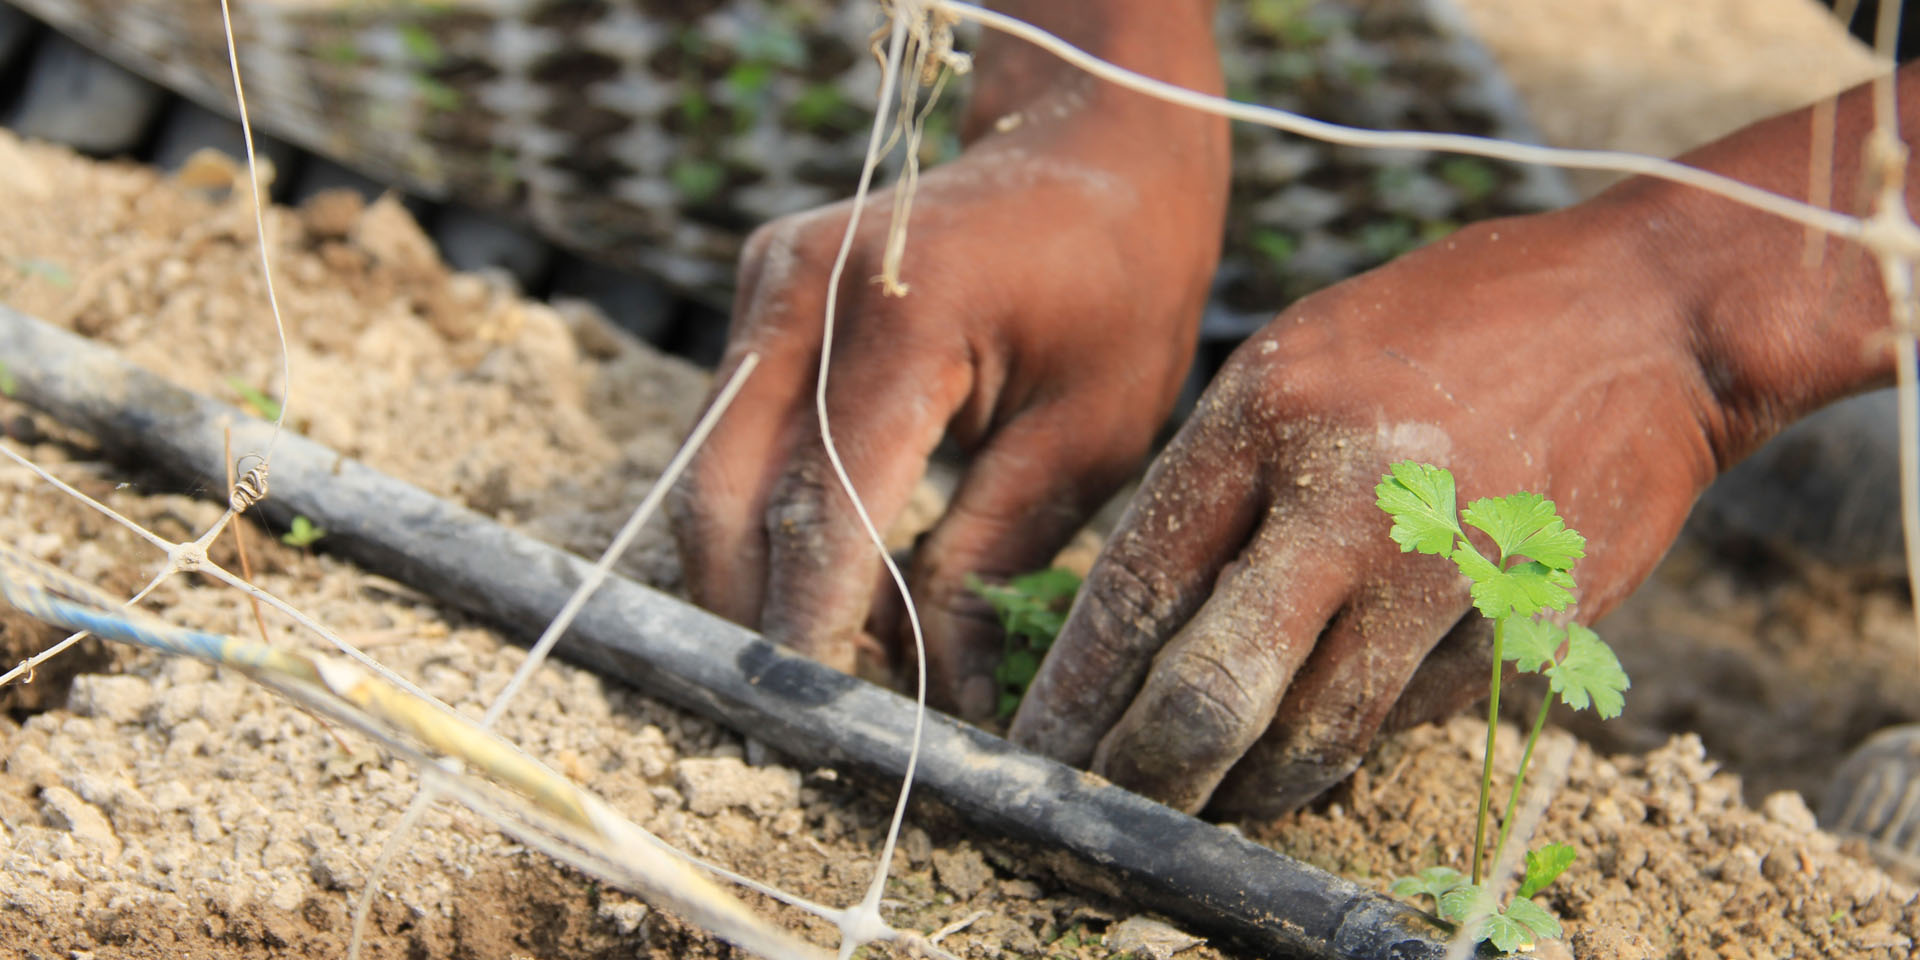 A close-up of hands planting sprouts in dirt.